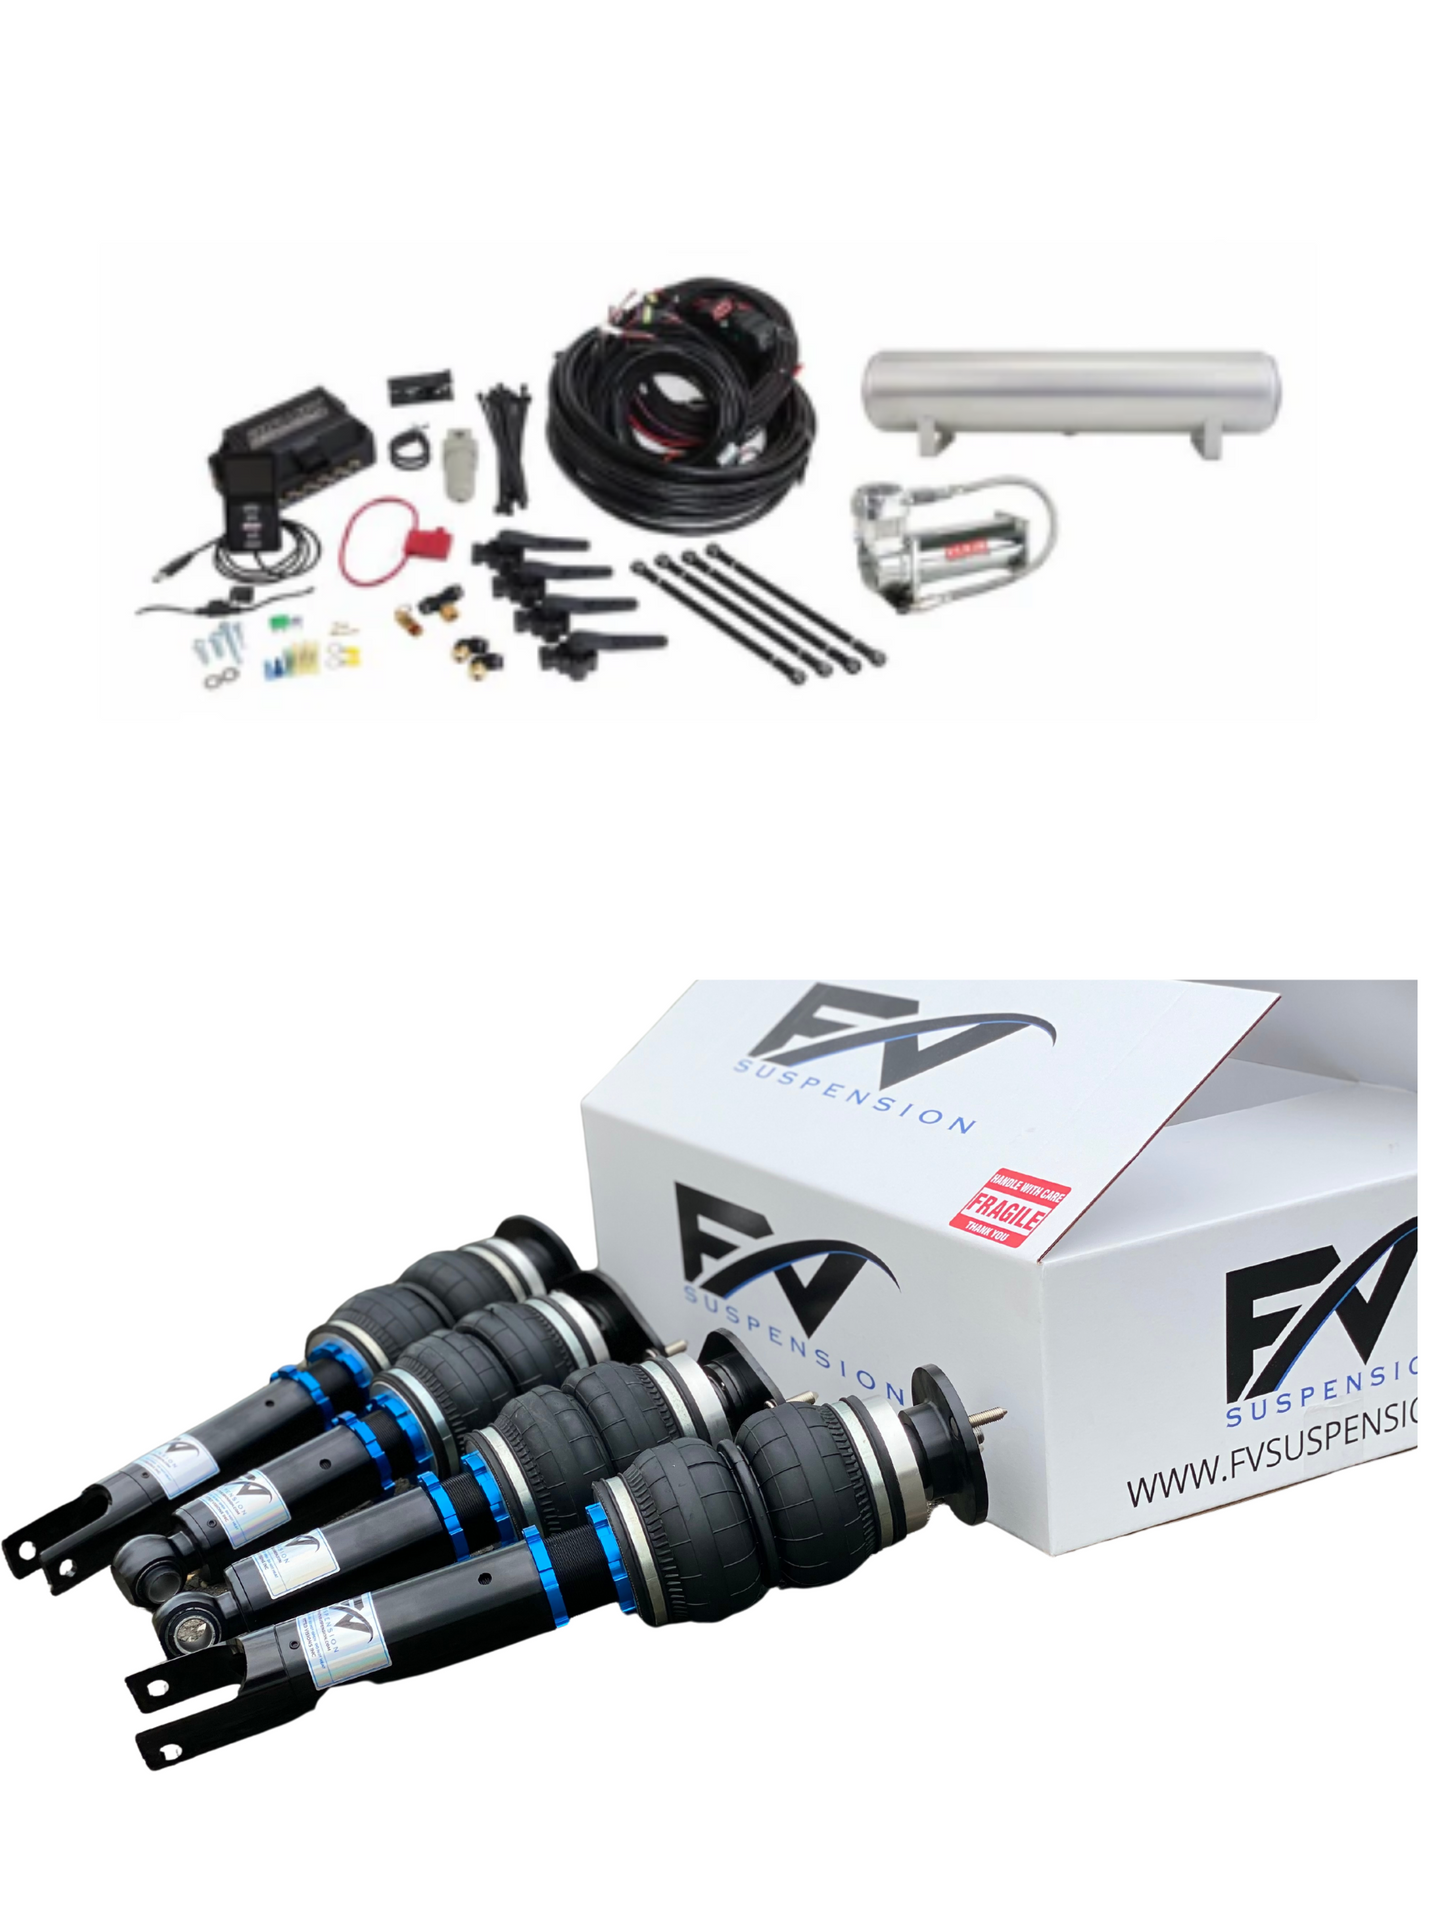 FV Suspension 3H Tier 3 Complete Air Ride kit for 18-22 Ford Mondeo MK5/ Fusion (US) - FVALtier3kit208